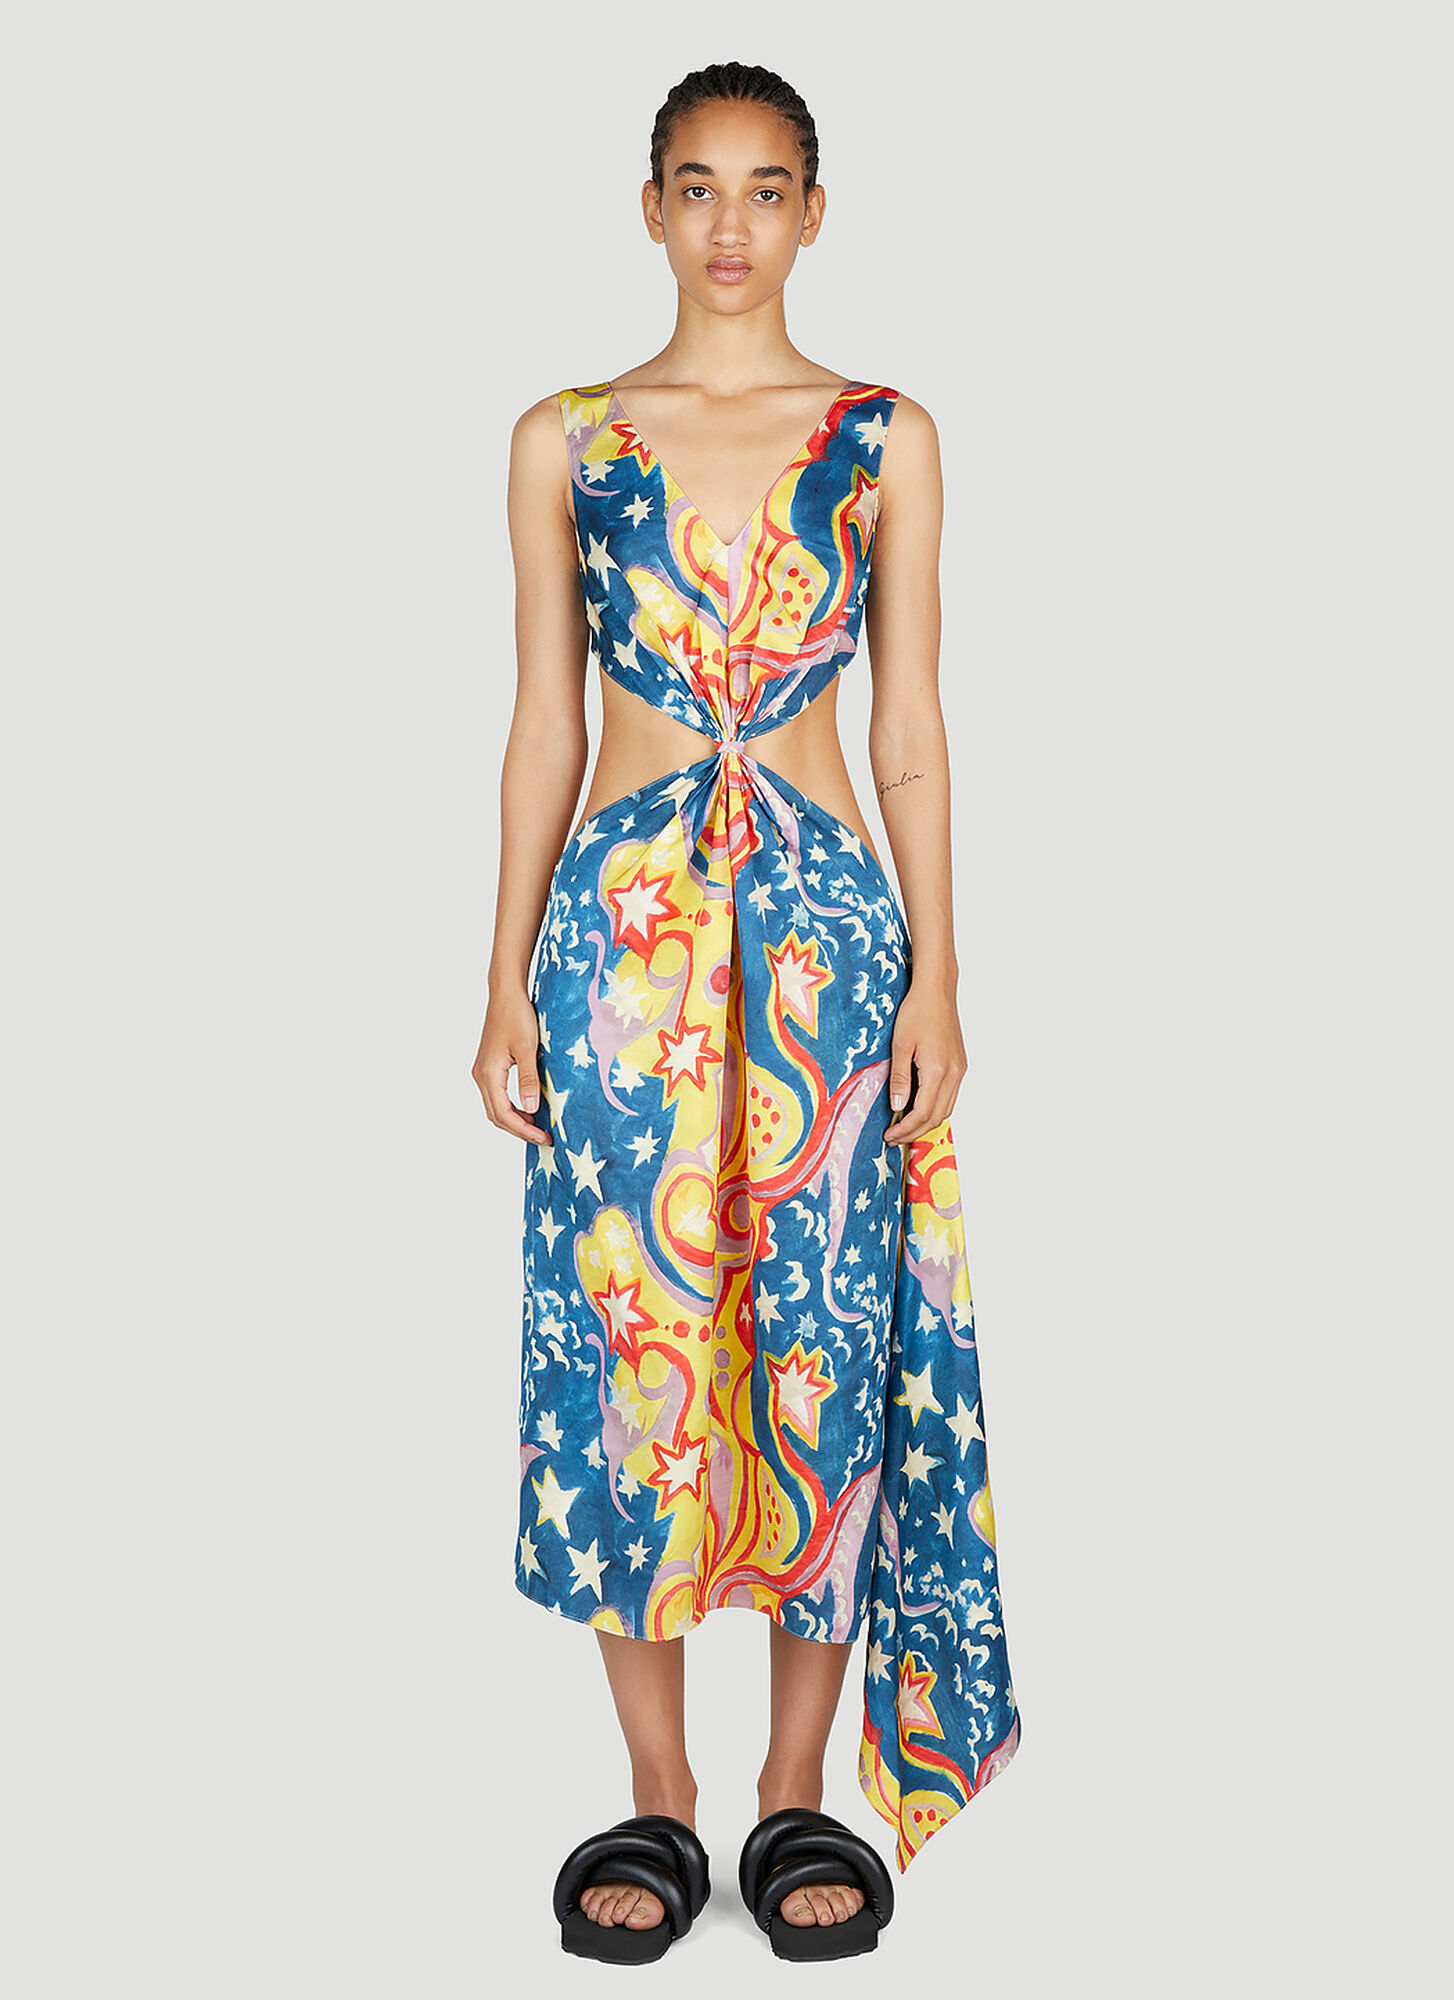 Marni X No Vacancy Royal Cut Out Dress In Multicolour